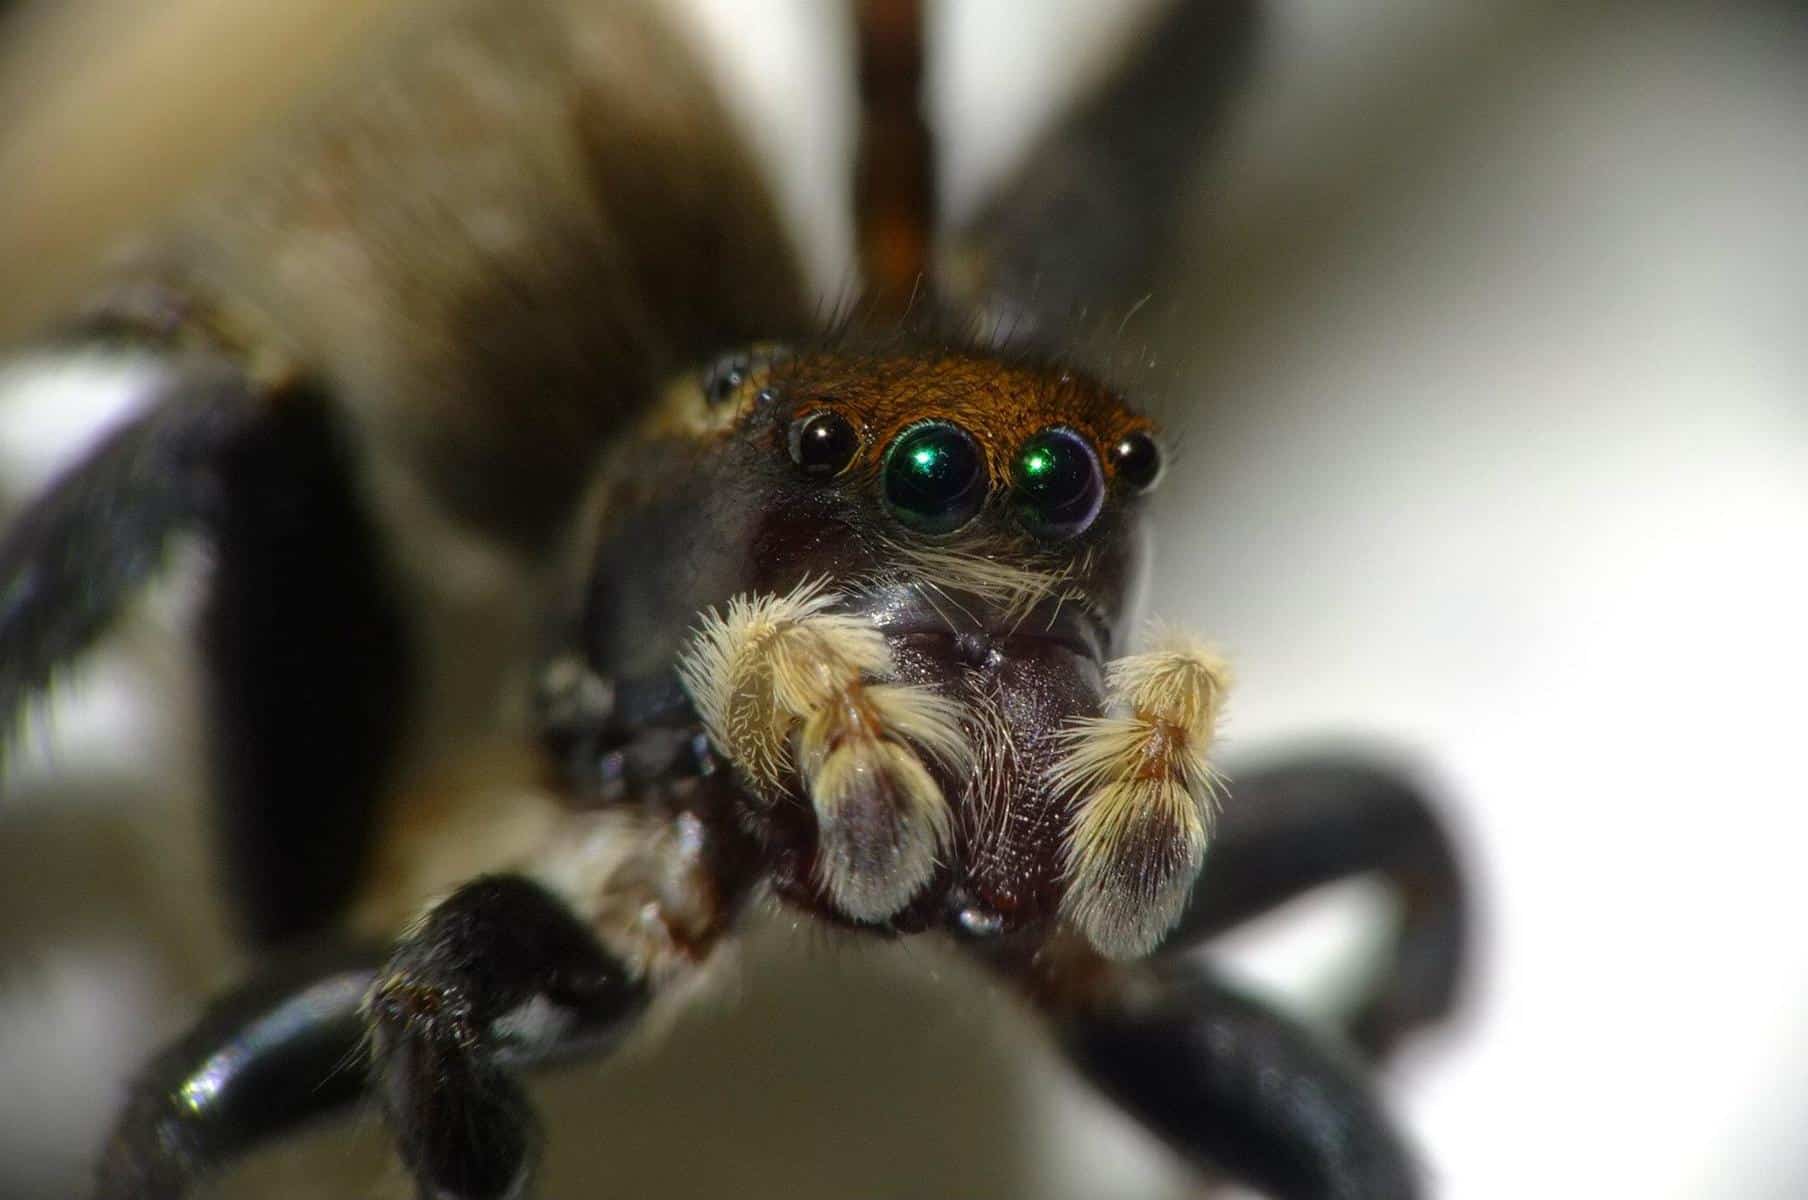 More jumping spider eyes